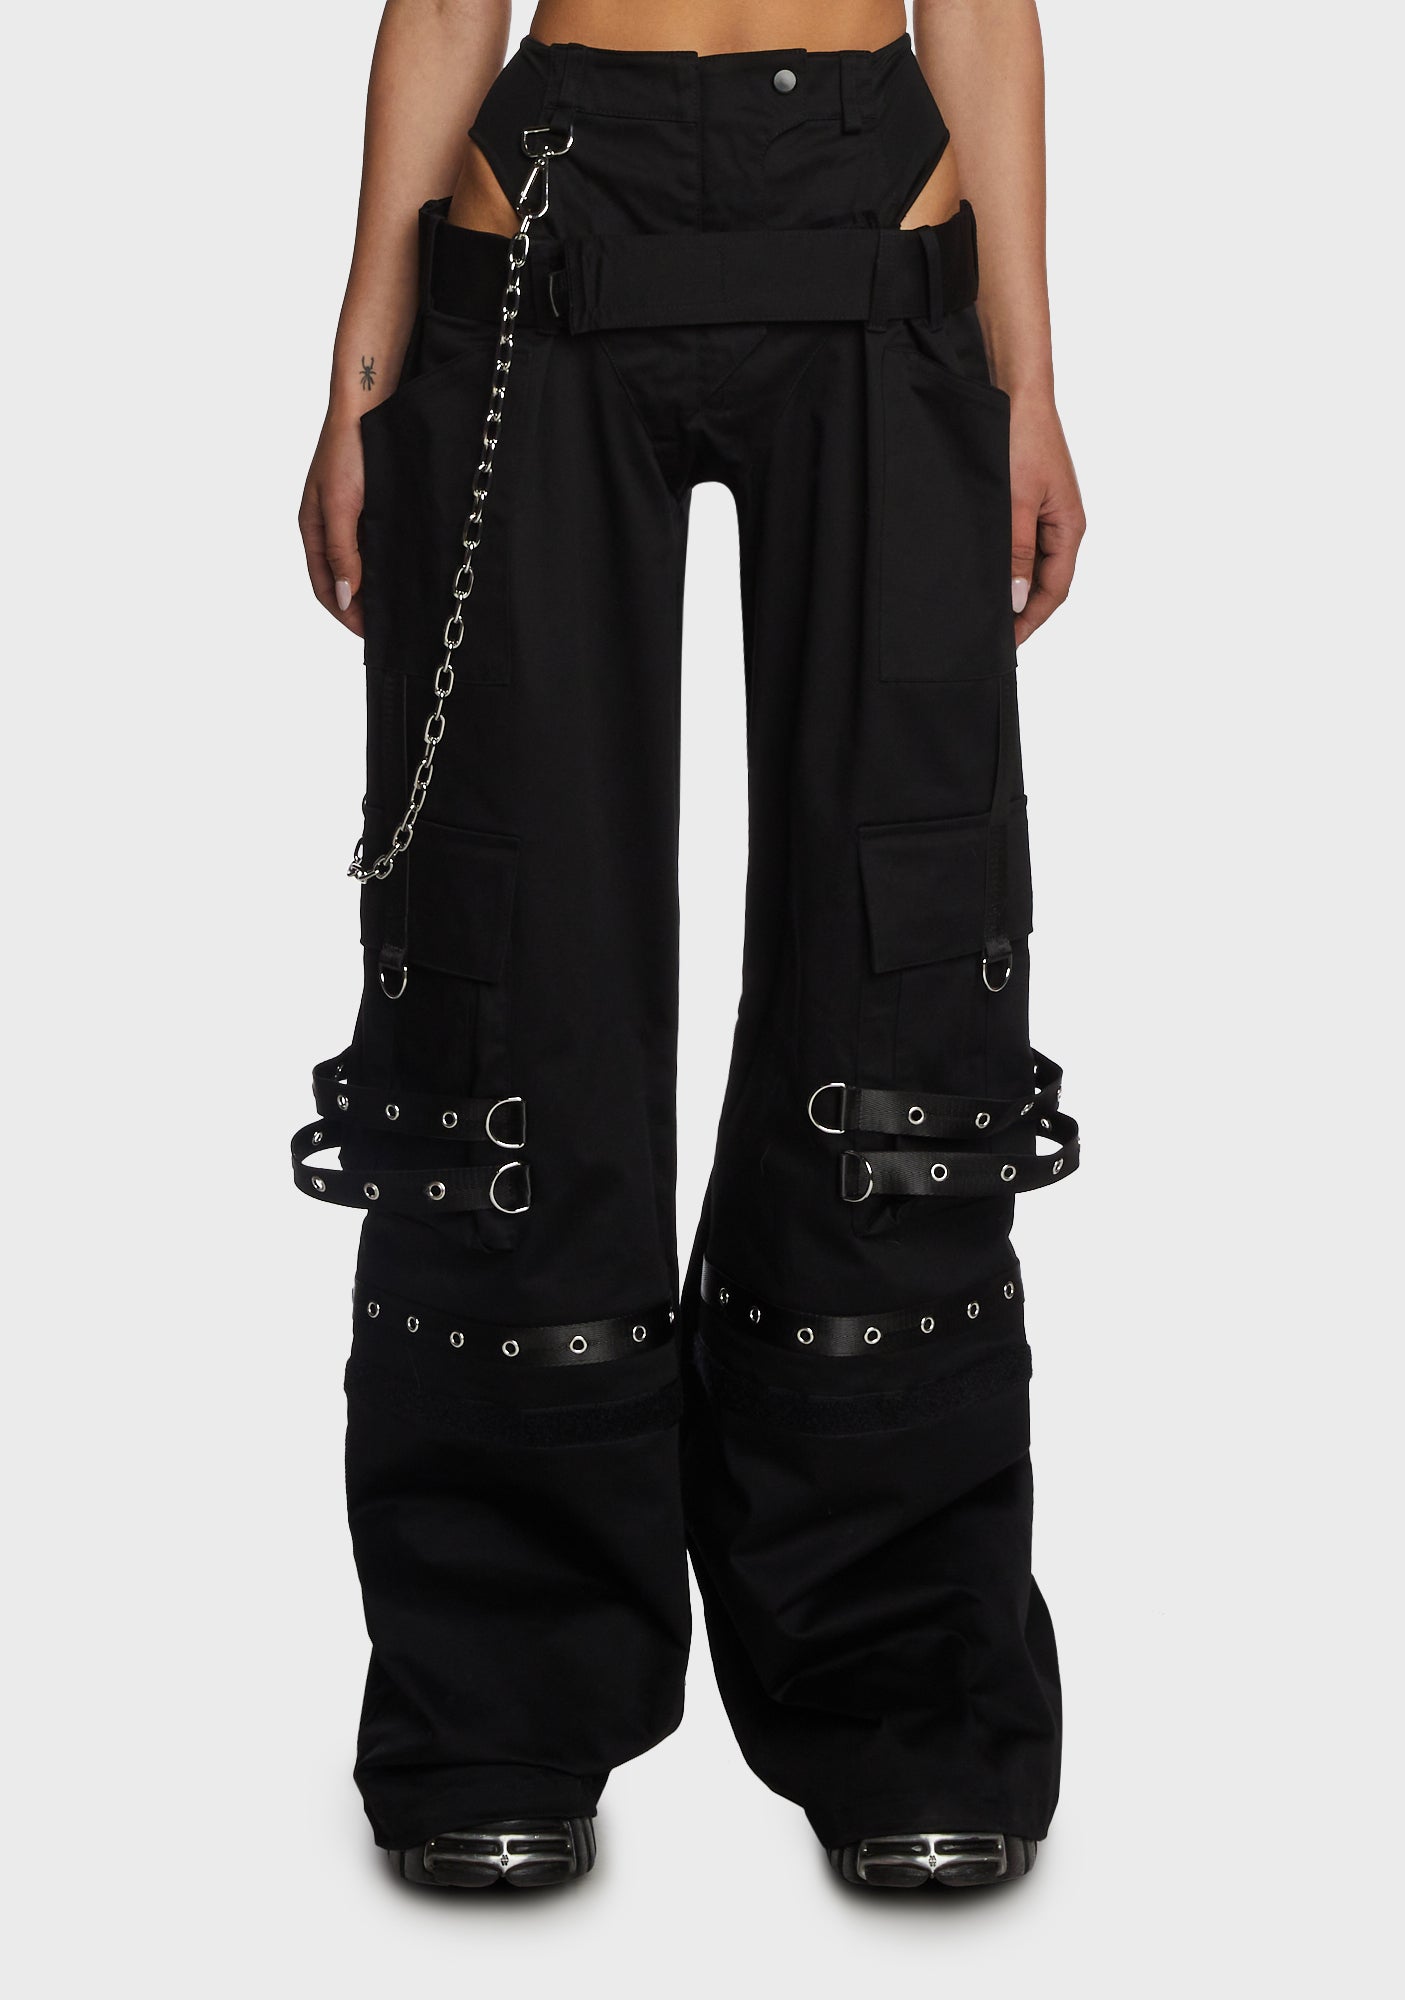 Hollow out high rise cut pattern joggers by HighBuy